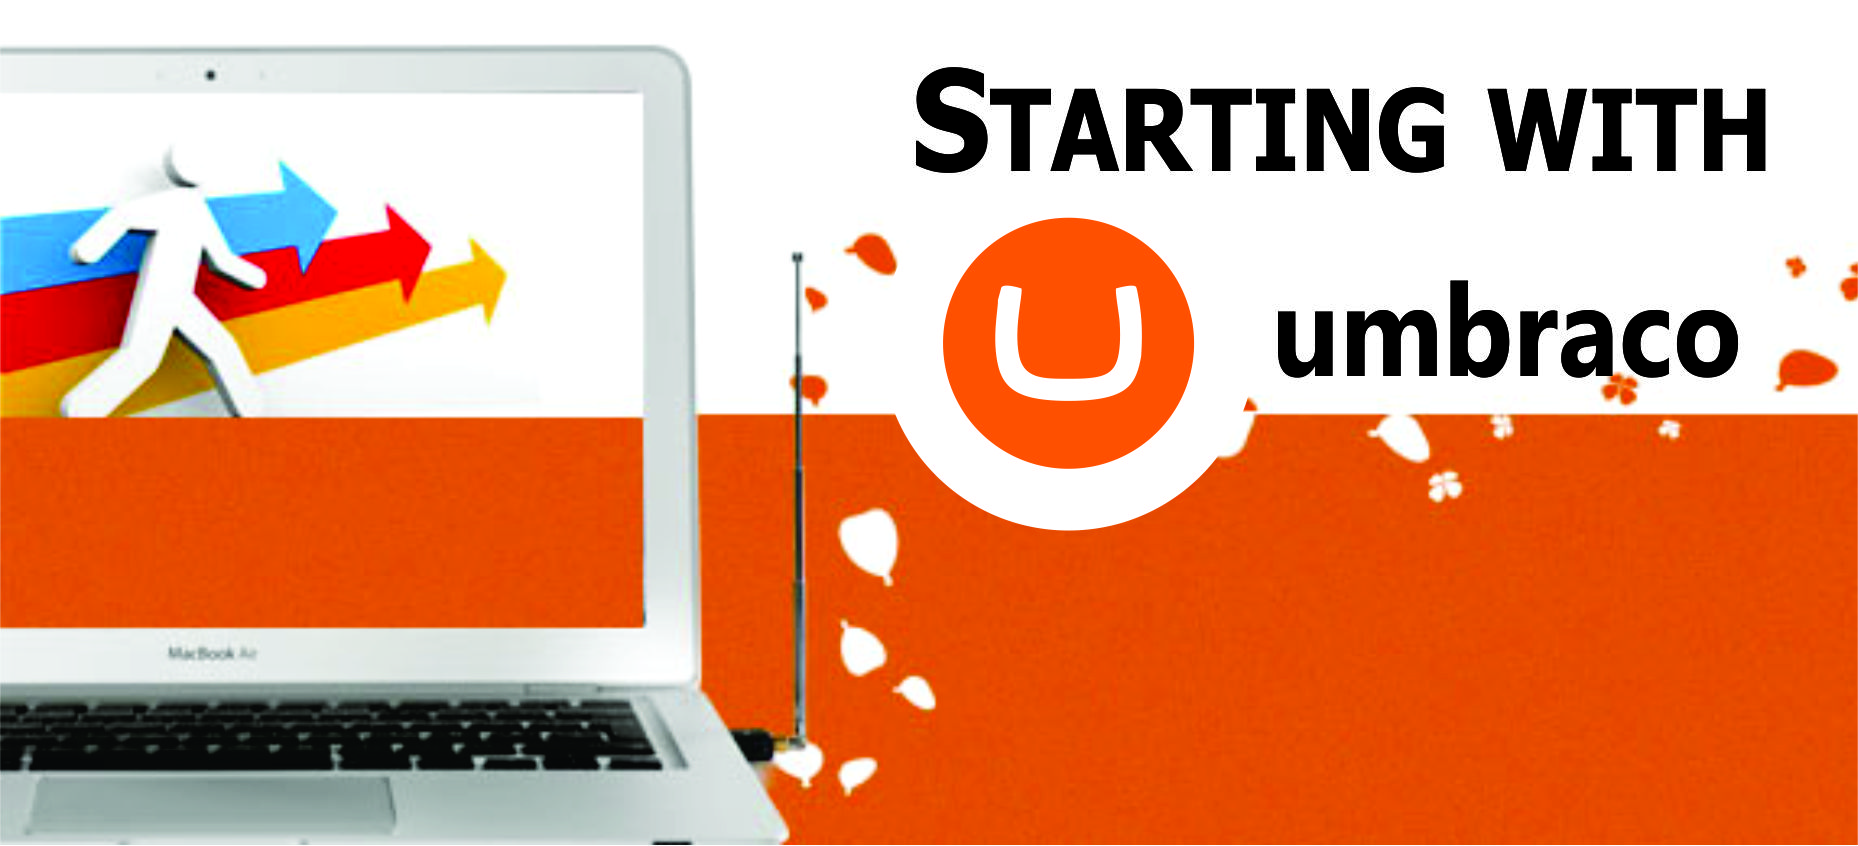 Starting with Umbraco